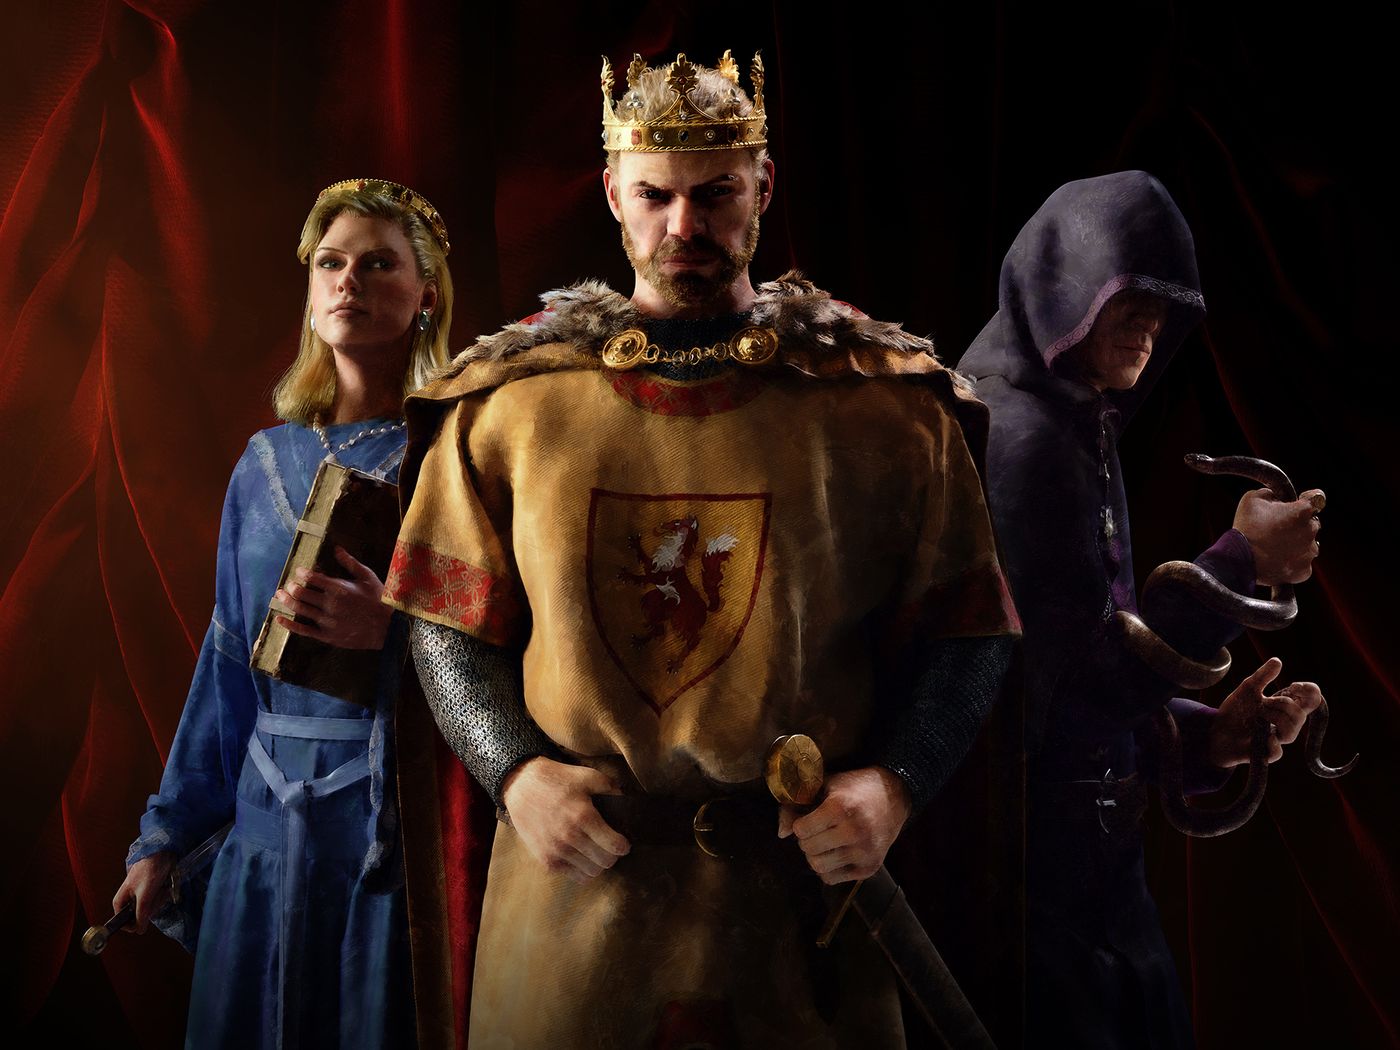 Image for Best of 2020: Crusader Kings 3, and Lauren’s other GOTY picks